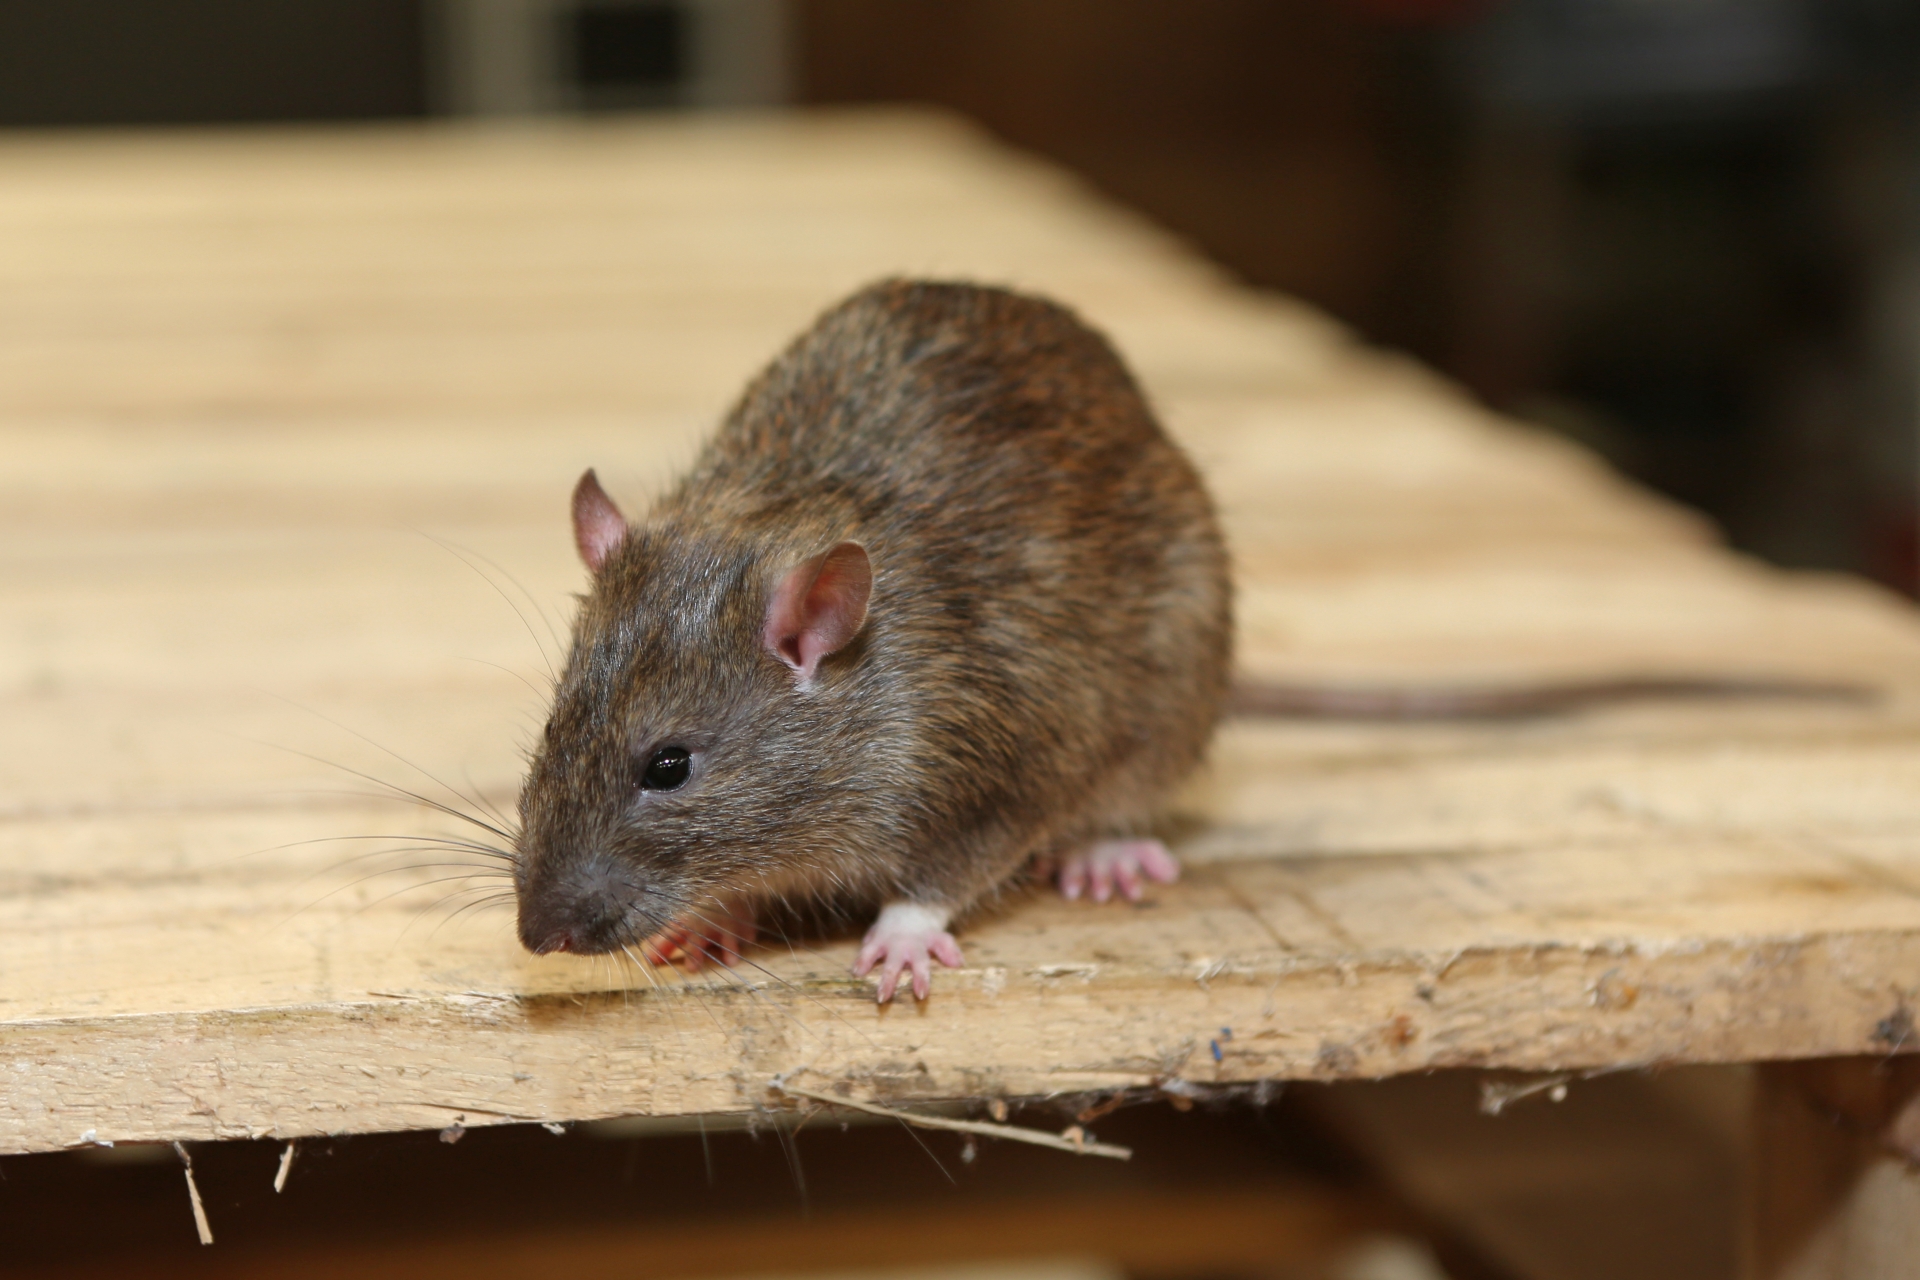 Rat Infestation, Pest Control in Hammersmith, W6. Call Now 020 8166 9746